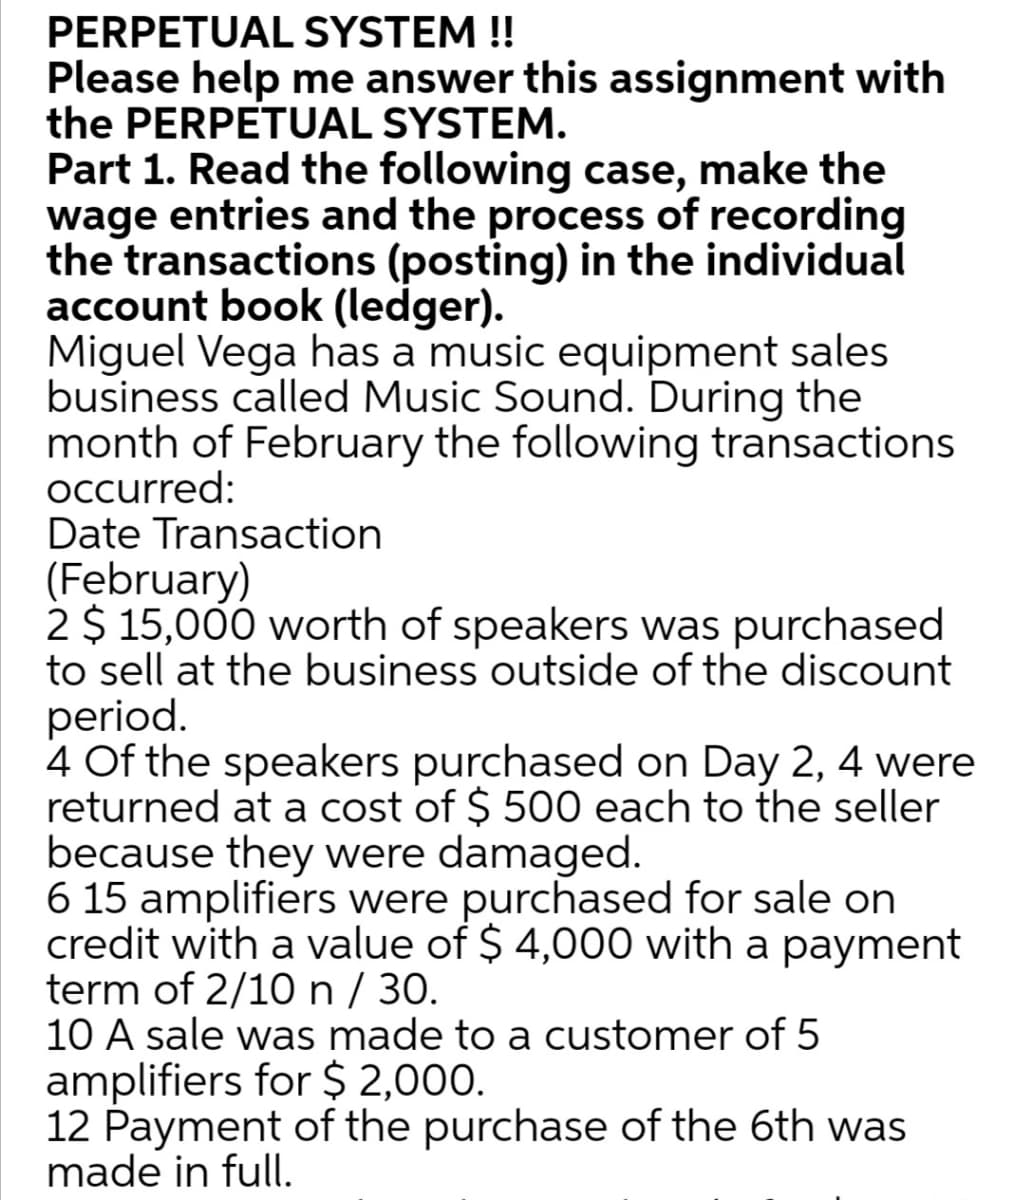 PERPETUAL SYSTEM !!
Please help me answer this assignment with
the PERPETUAL SYSTEM.
Part 1. Read the following case, make the
wage entries and the process of recording
the transactions (posting) in the individual
account book (ledger).
Miguel Vega has a music equipment sales
business called Music Sound. During the
month of February the following transactions
Occurred:
Date Transaction
(February)
2 $ 15,000 worth of speakers was purchased
to sell at the business outside of the discount
period.
4 Of the speakers purchased on Day 2, 4 were
returned at a cost of $ 500 each to the seller
because they were damaged.
6 15 amplifiers were purchased for sale on
credit with a value of $ 4,000 with a payment
term of 2/10 n / 30.
10 A sale was made to a customer of 5
amplifiers for $ 2,000.
12 Payment of the purchase of the 6th was
made in full.
